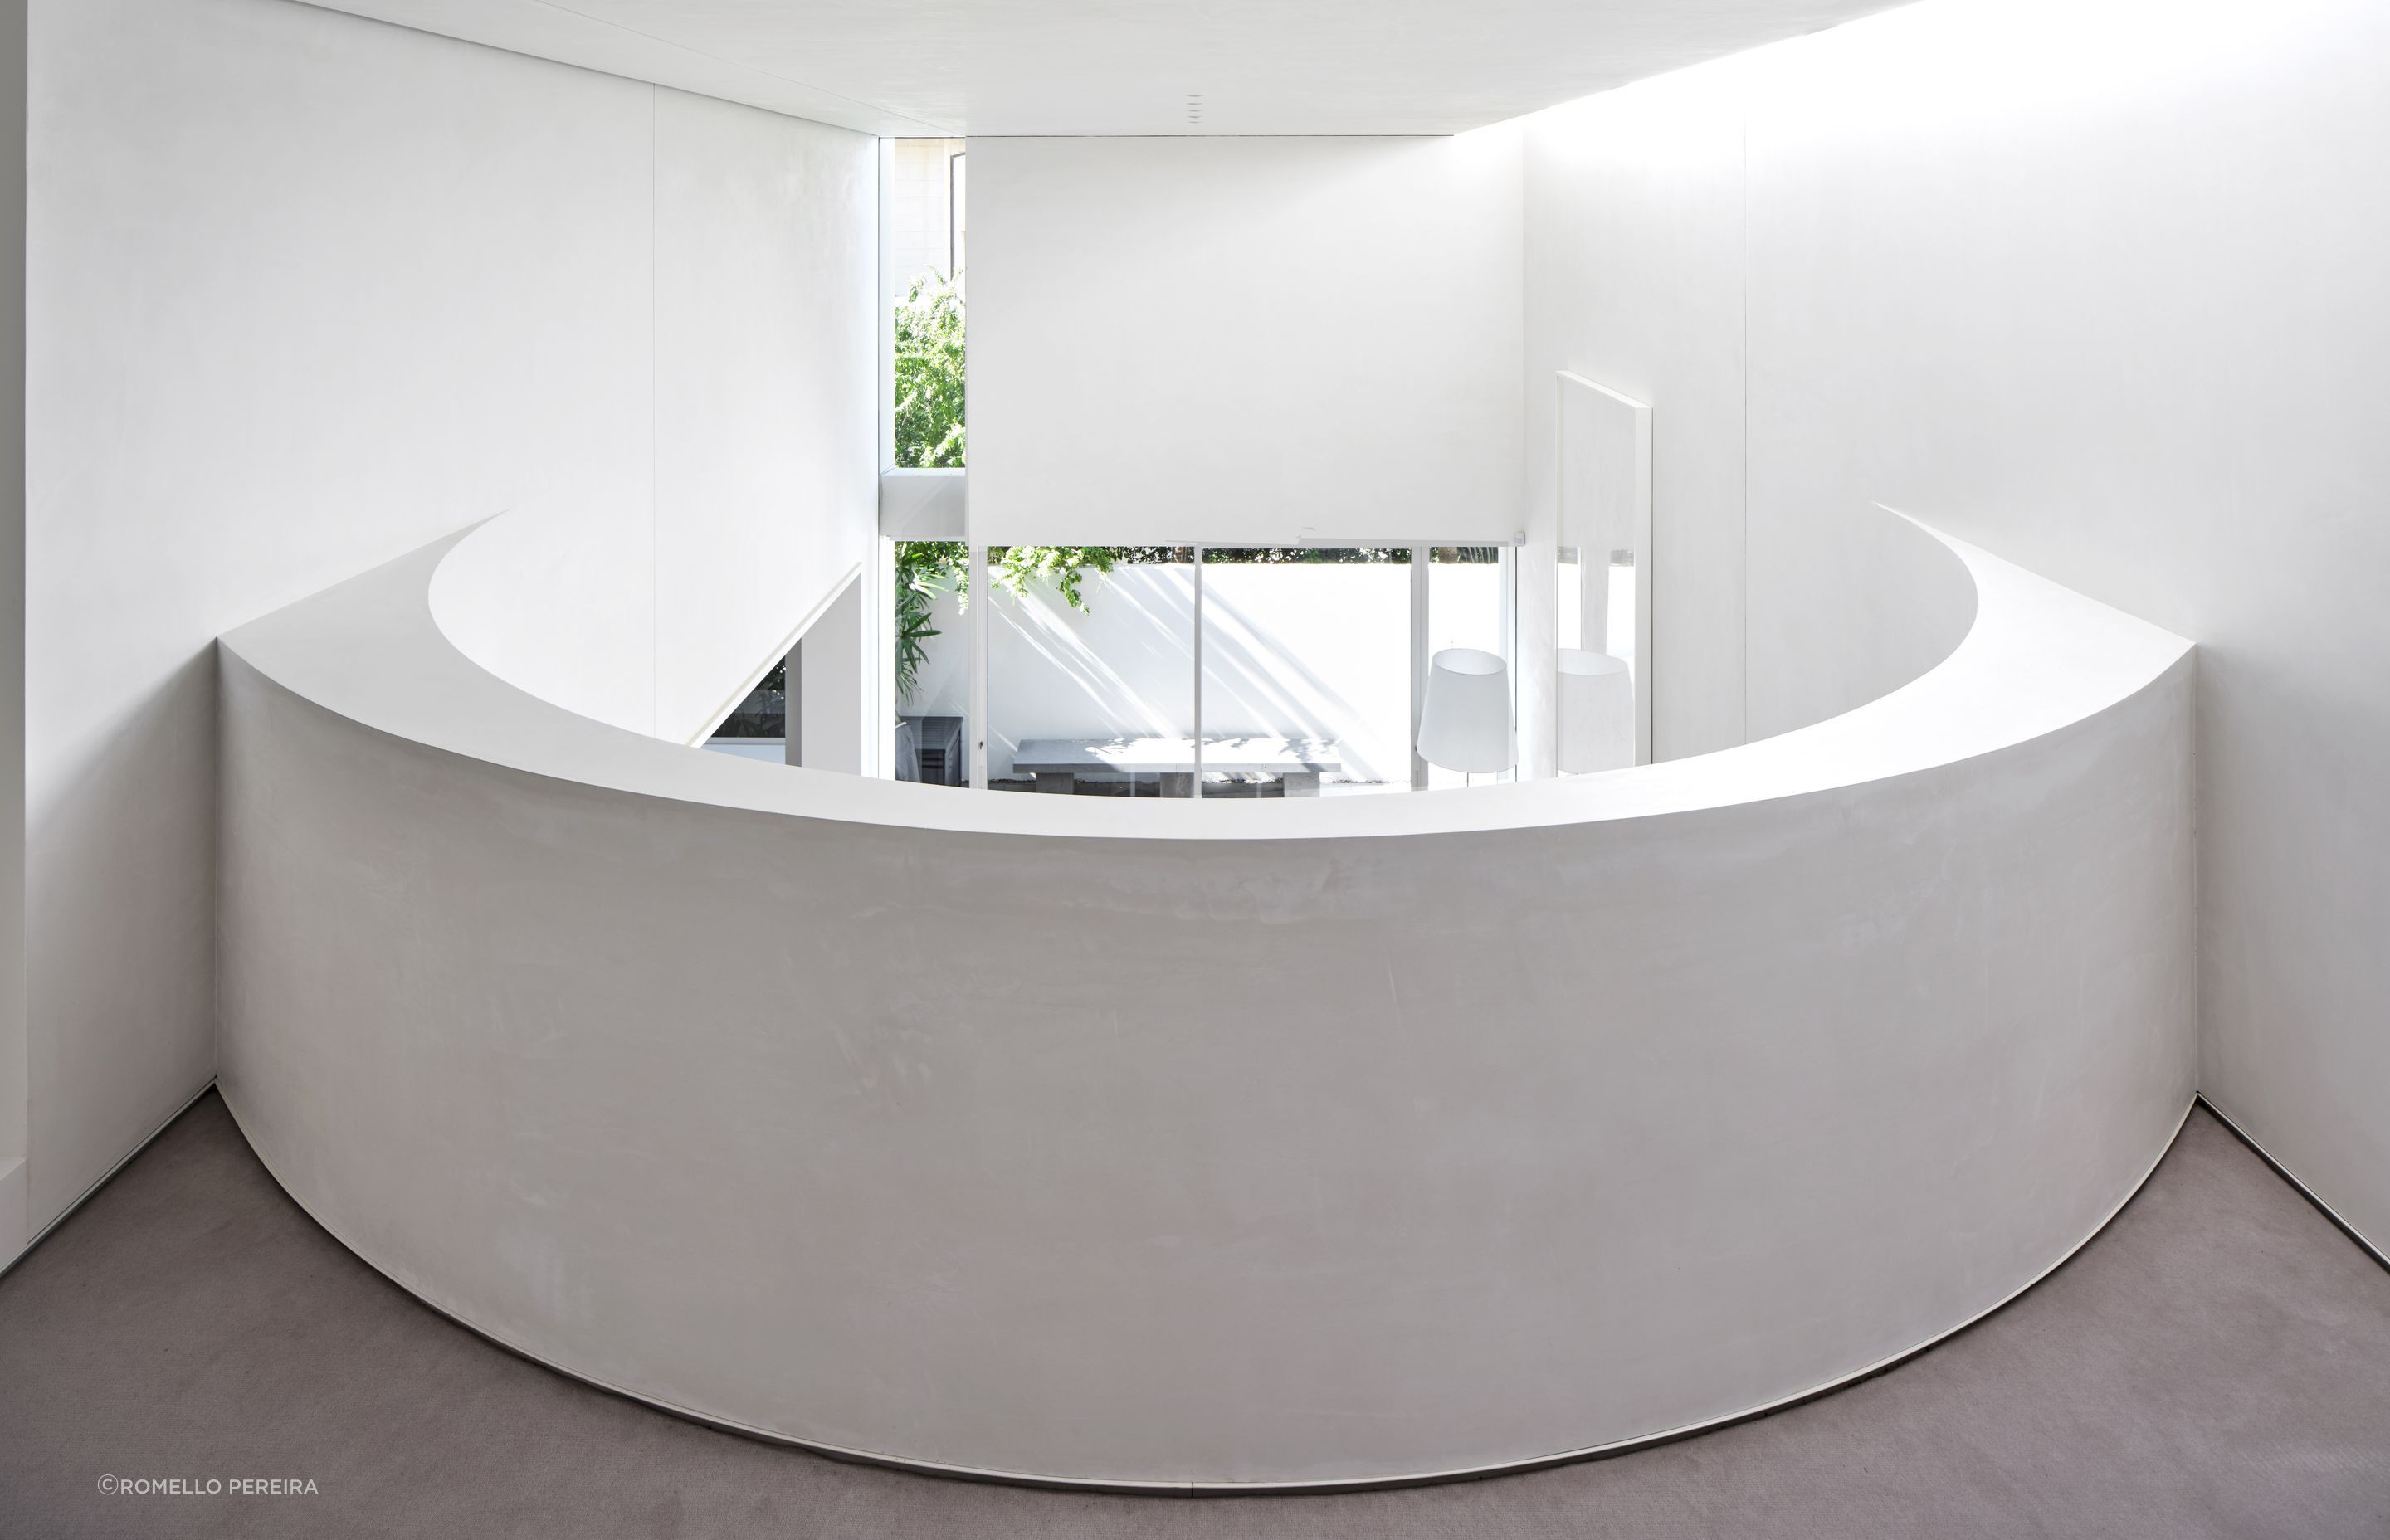 The curved wall of the mezzanine, looking down over the living and outdoor spaces.